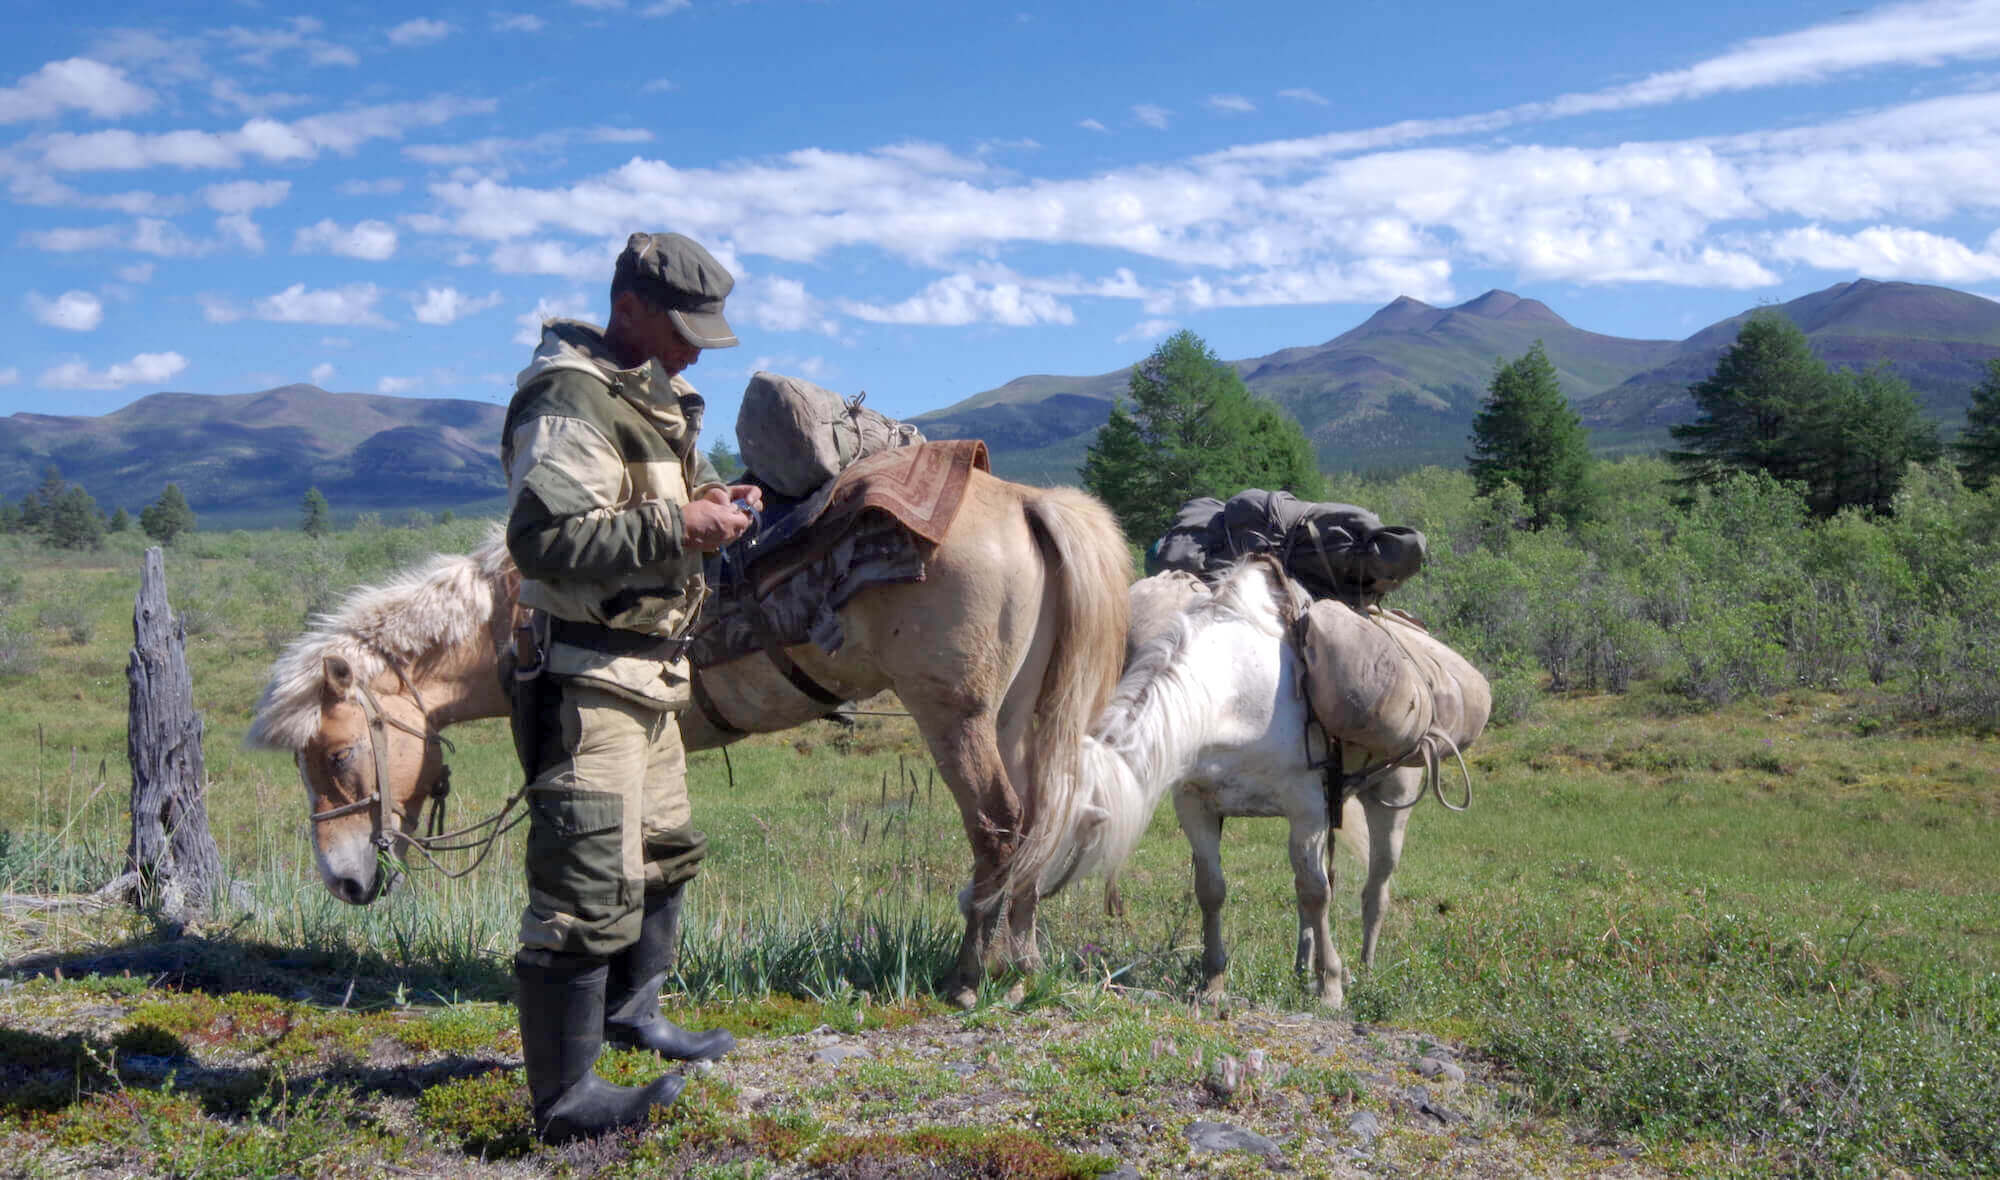 Reindeer herder moving back to the summer camp with horses